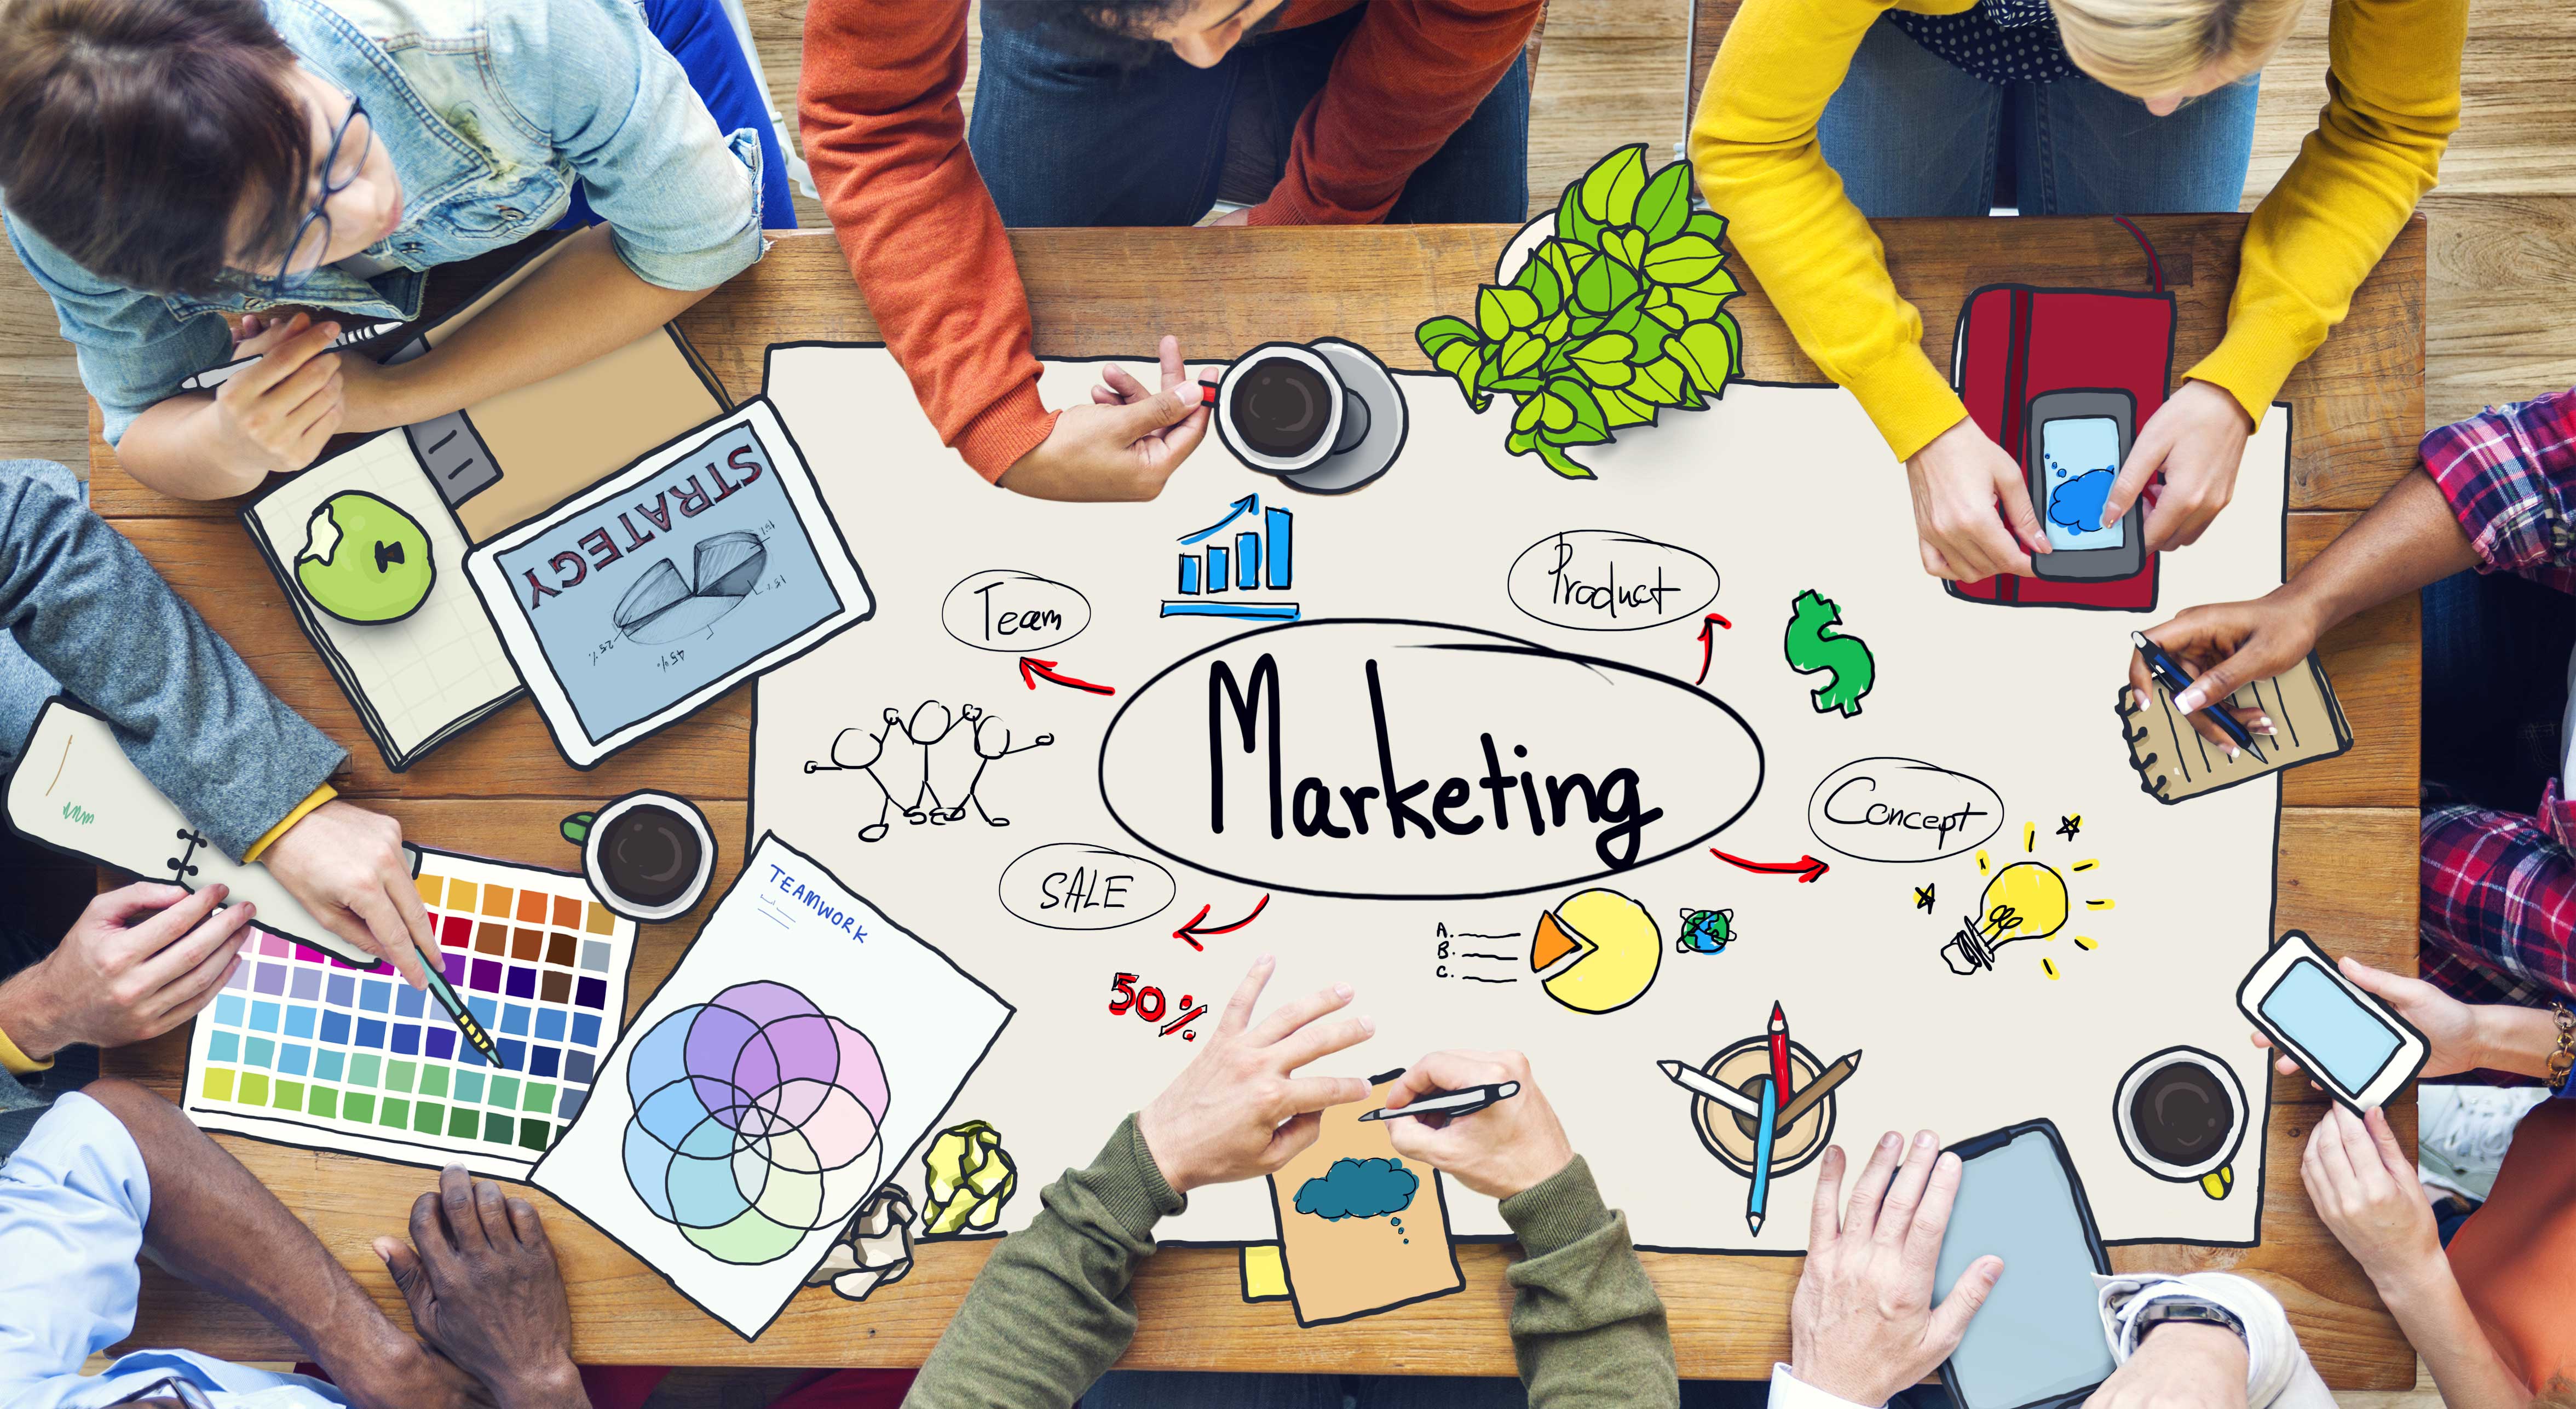 4 Principles of marketing strategy you should know